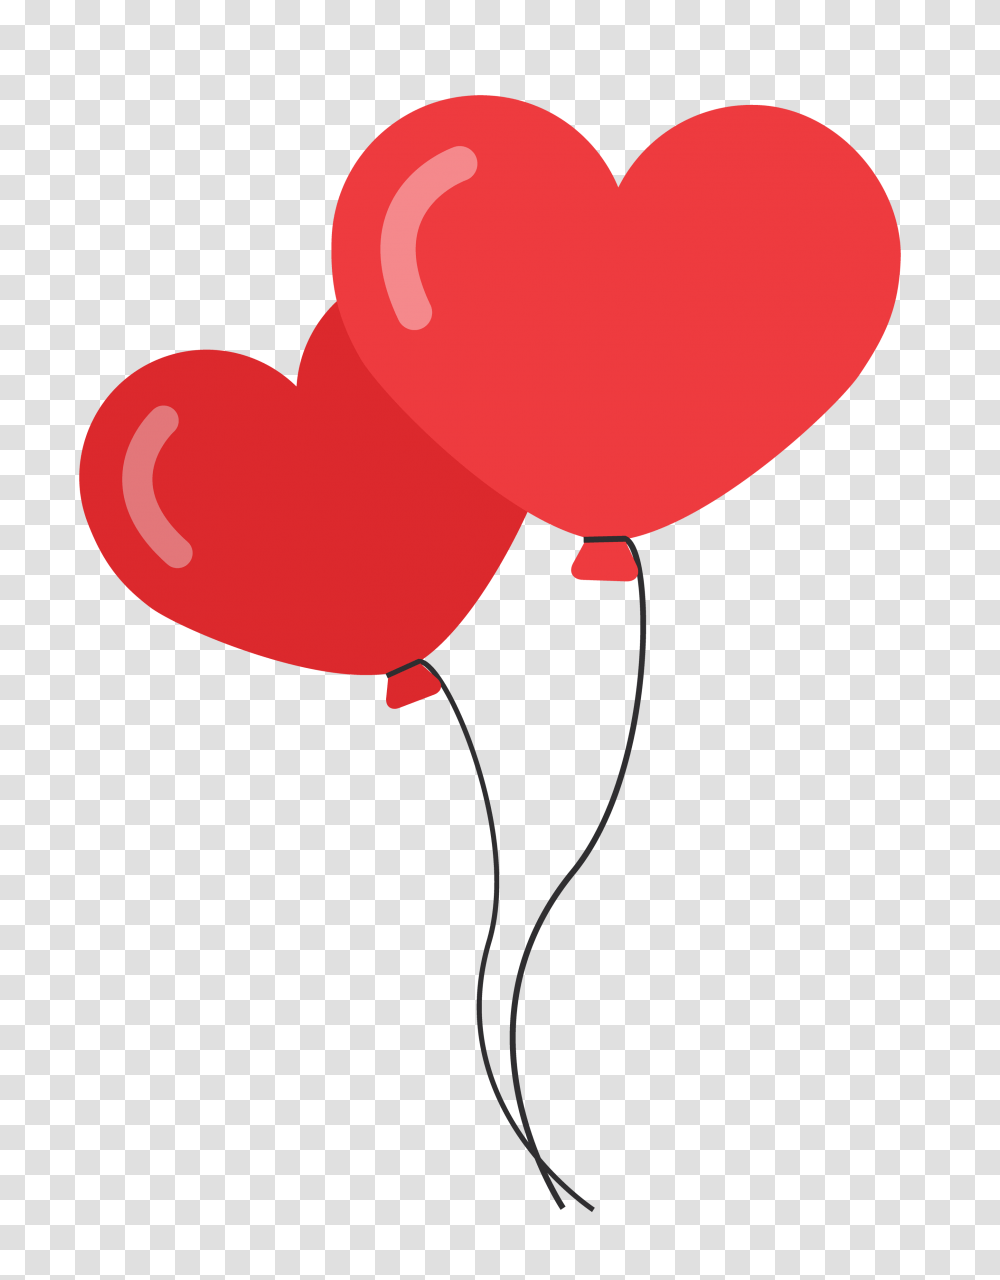 Library Of Heart Shaped Balloons Clip Heart Shaped Balloons, Pin Transparent Png